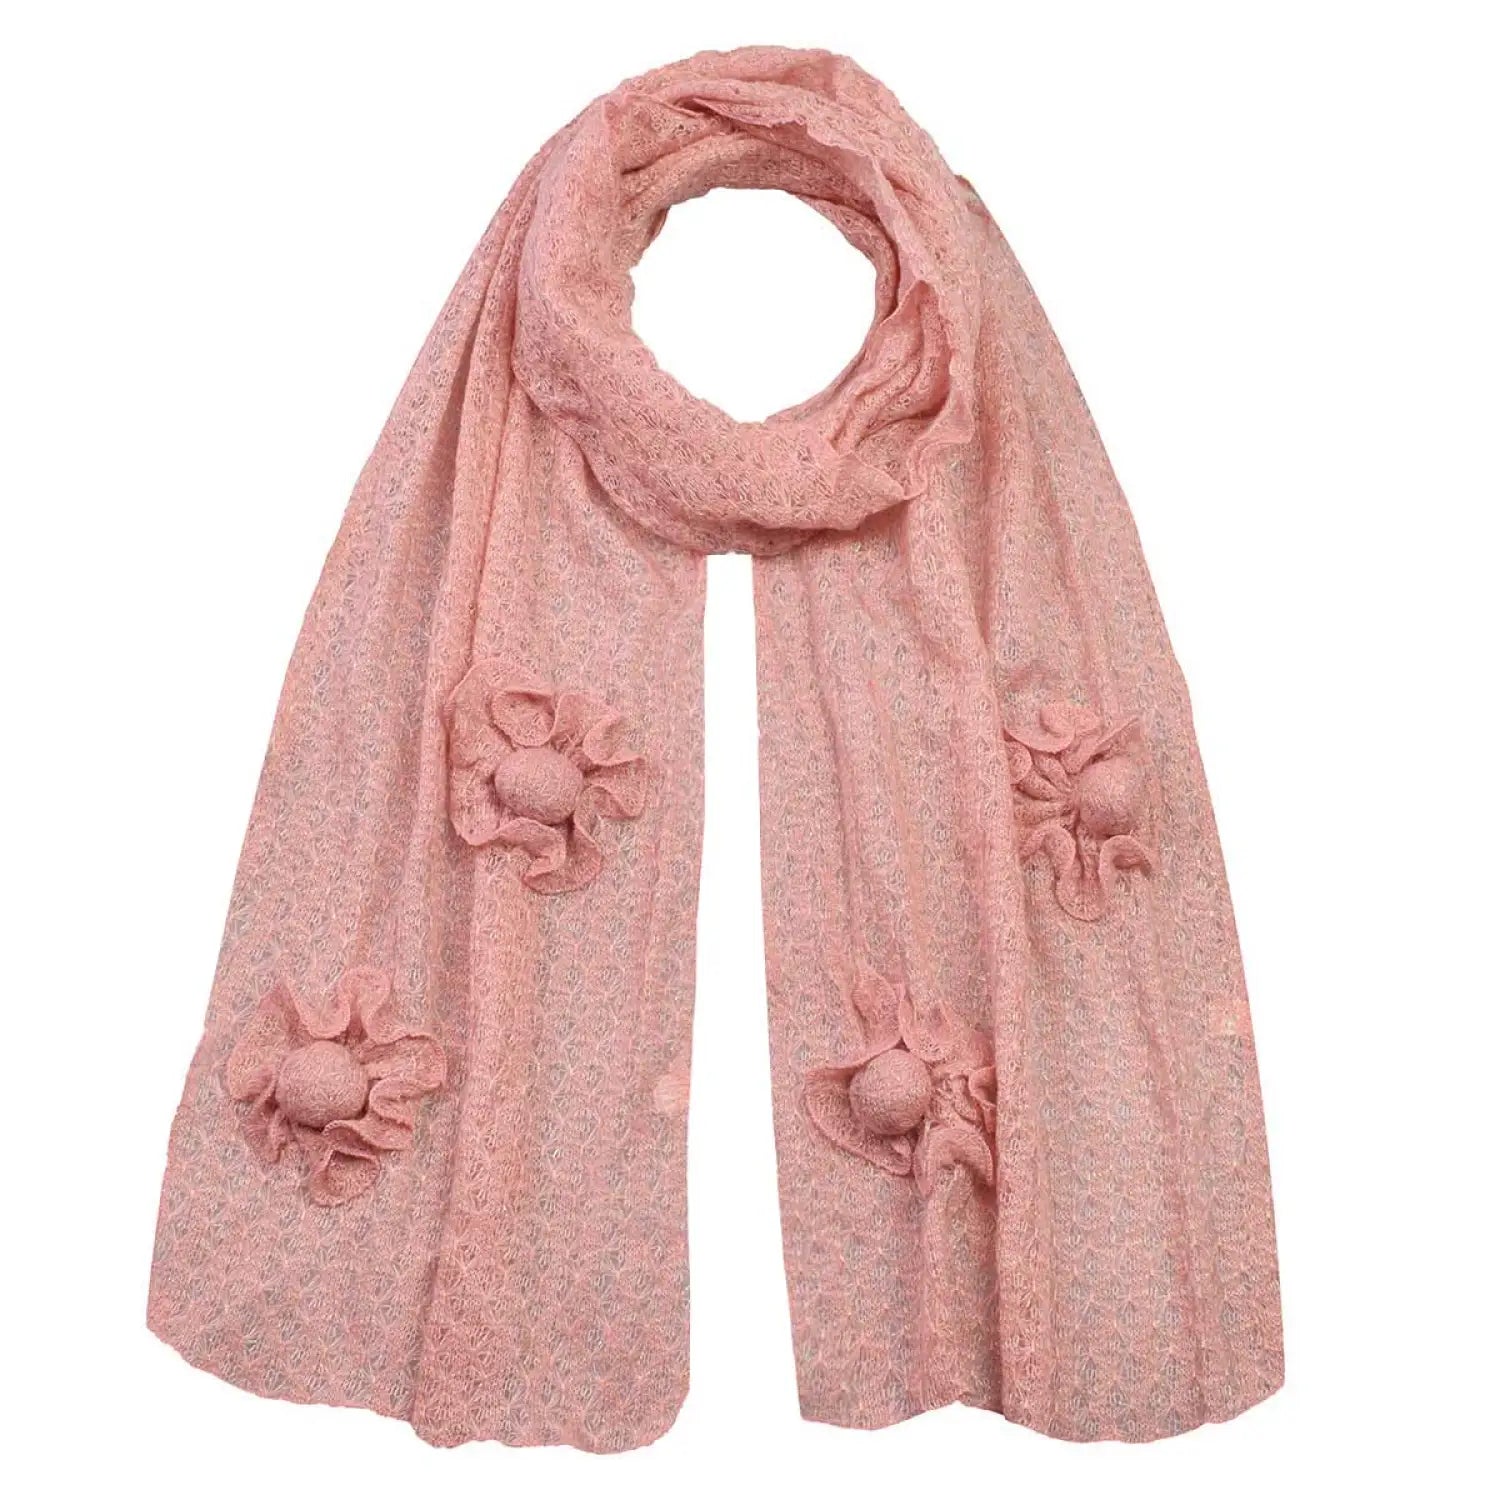 Pink knitted scarf with shimmering flower pattern, from Attached Flower Knitted Shimmering Lightweight Scarf.